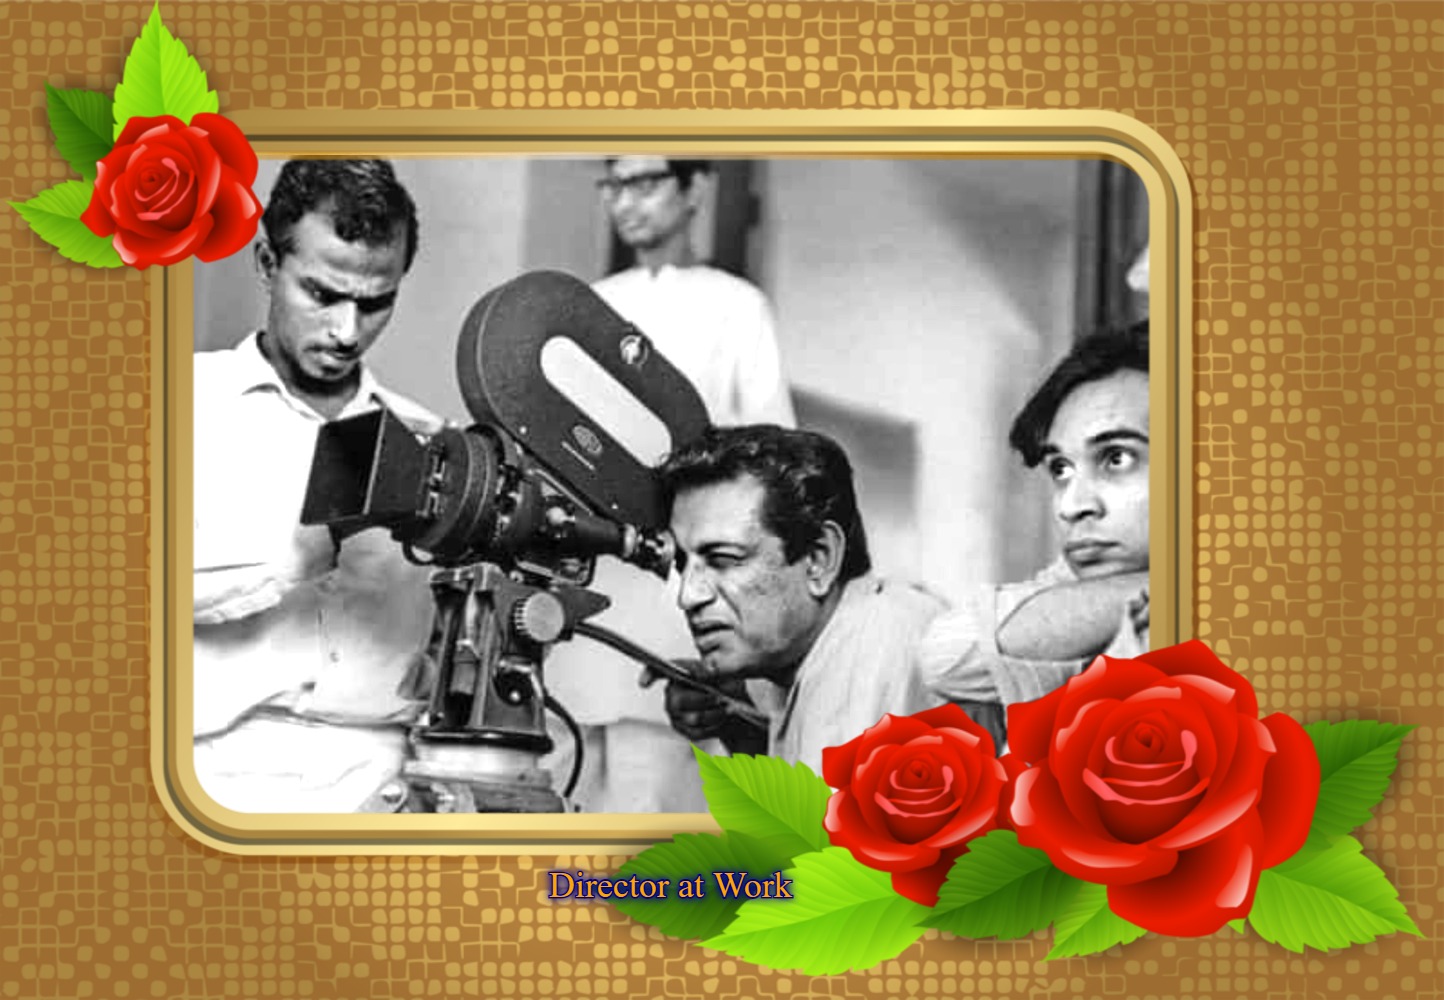 You are currently viewing ” The Pragmatic Film Maker – Satyajit Ray “.